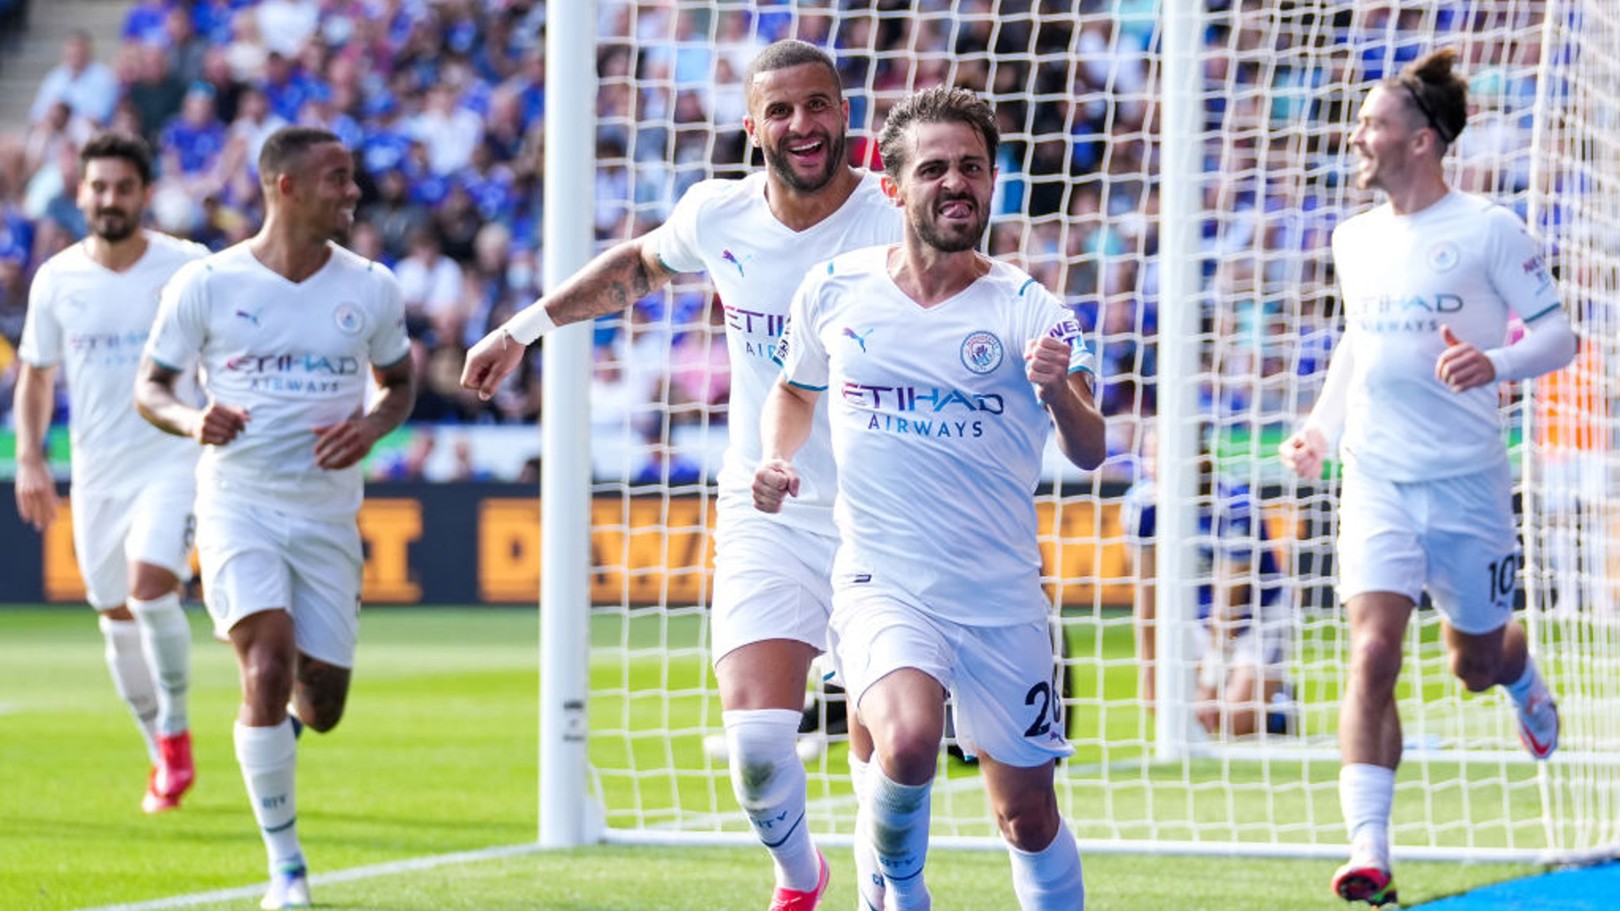 The story behind City’s water-inspired away kit 